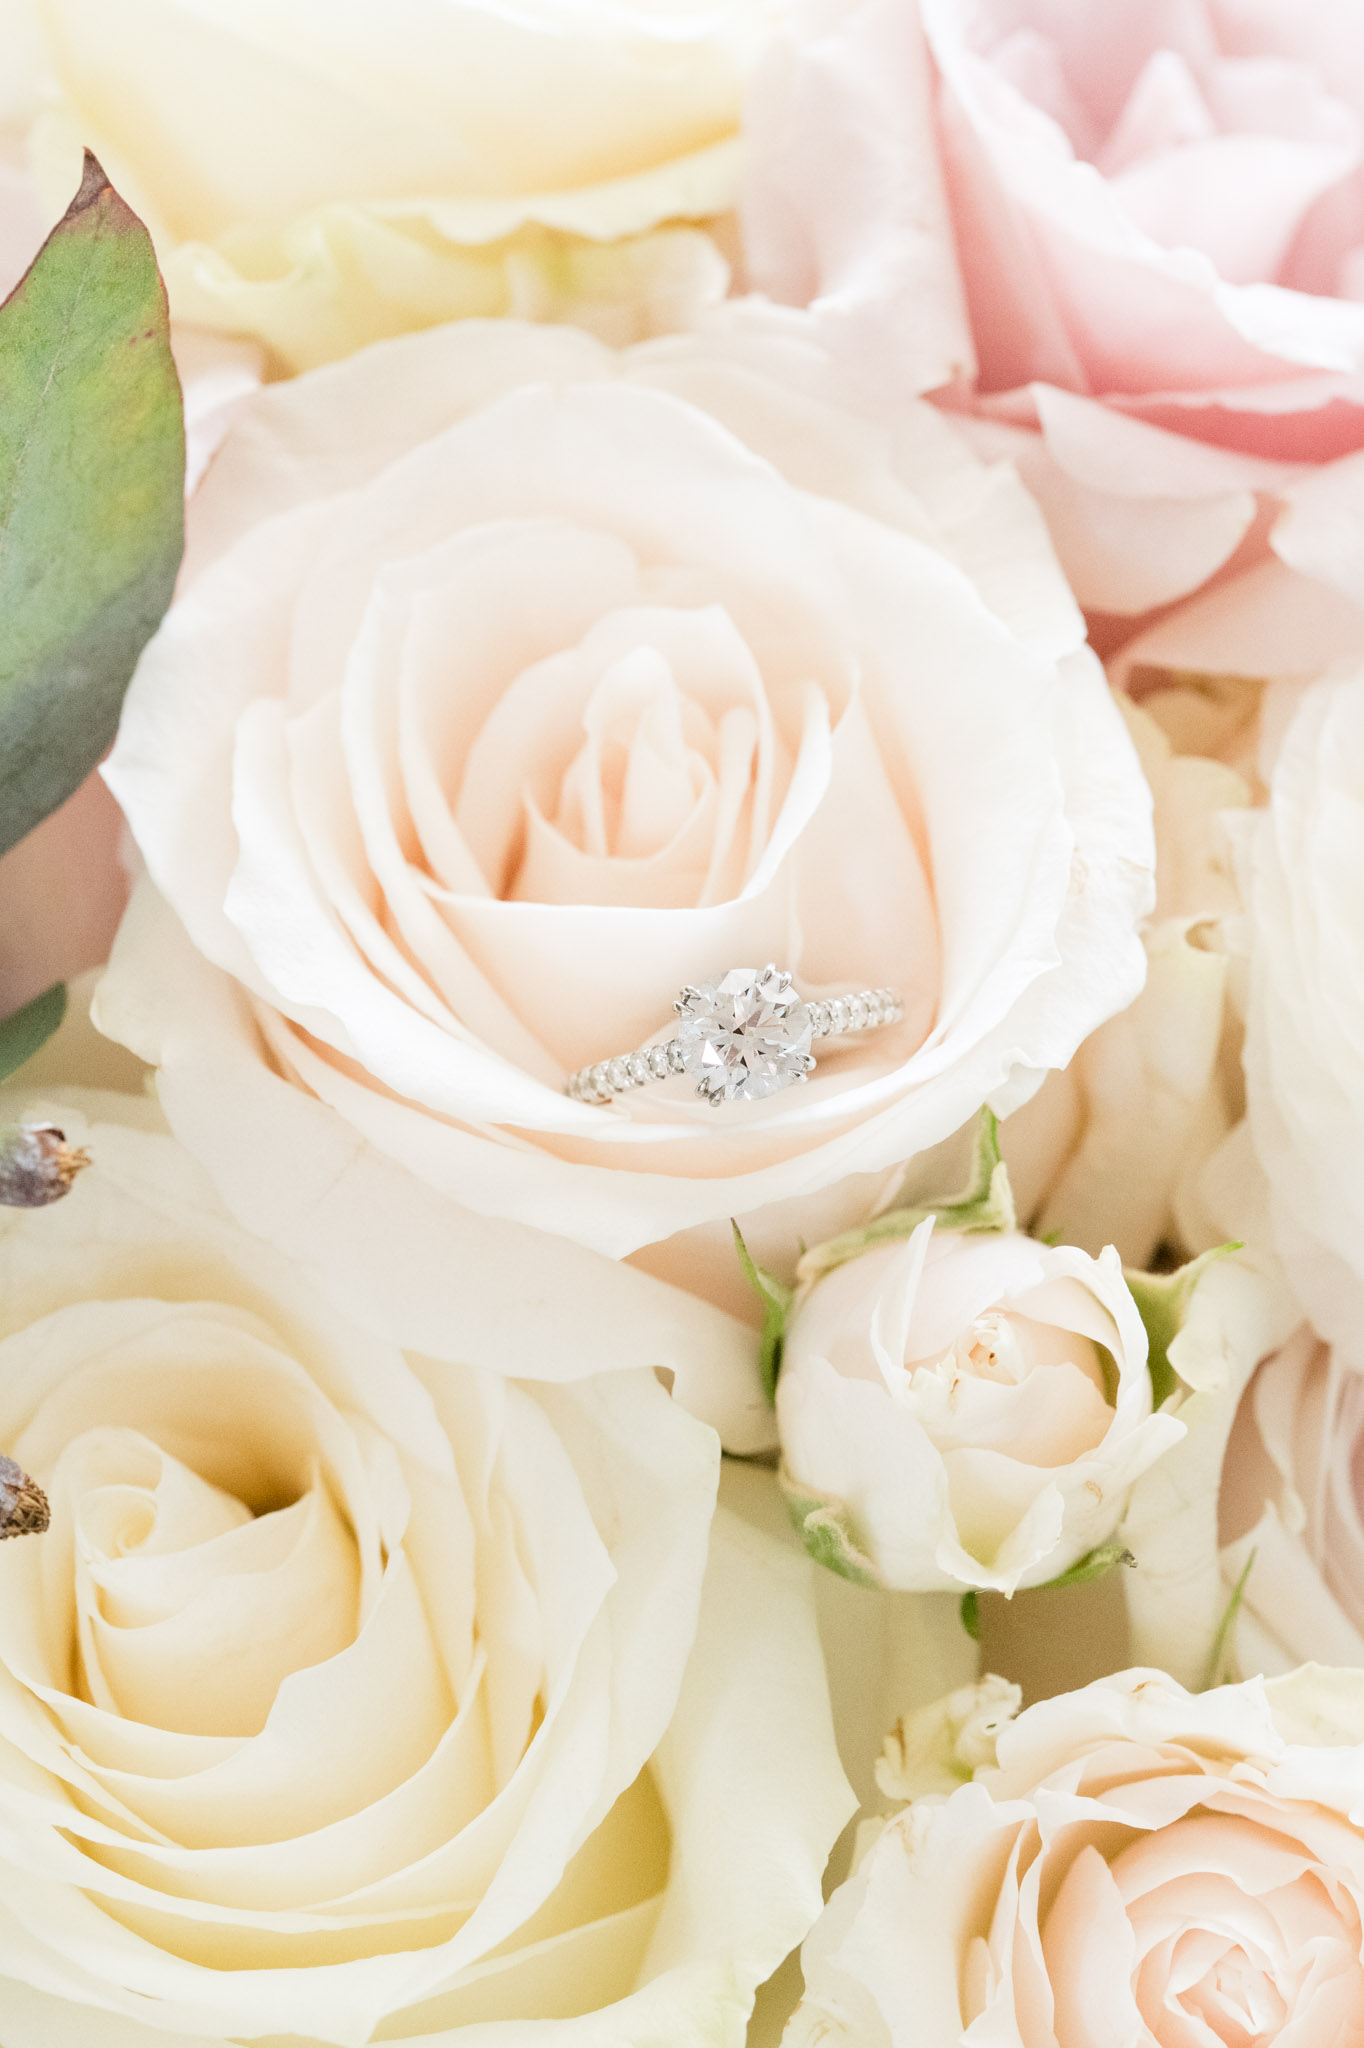 Wedding flowers and engagement ring.